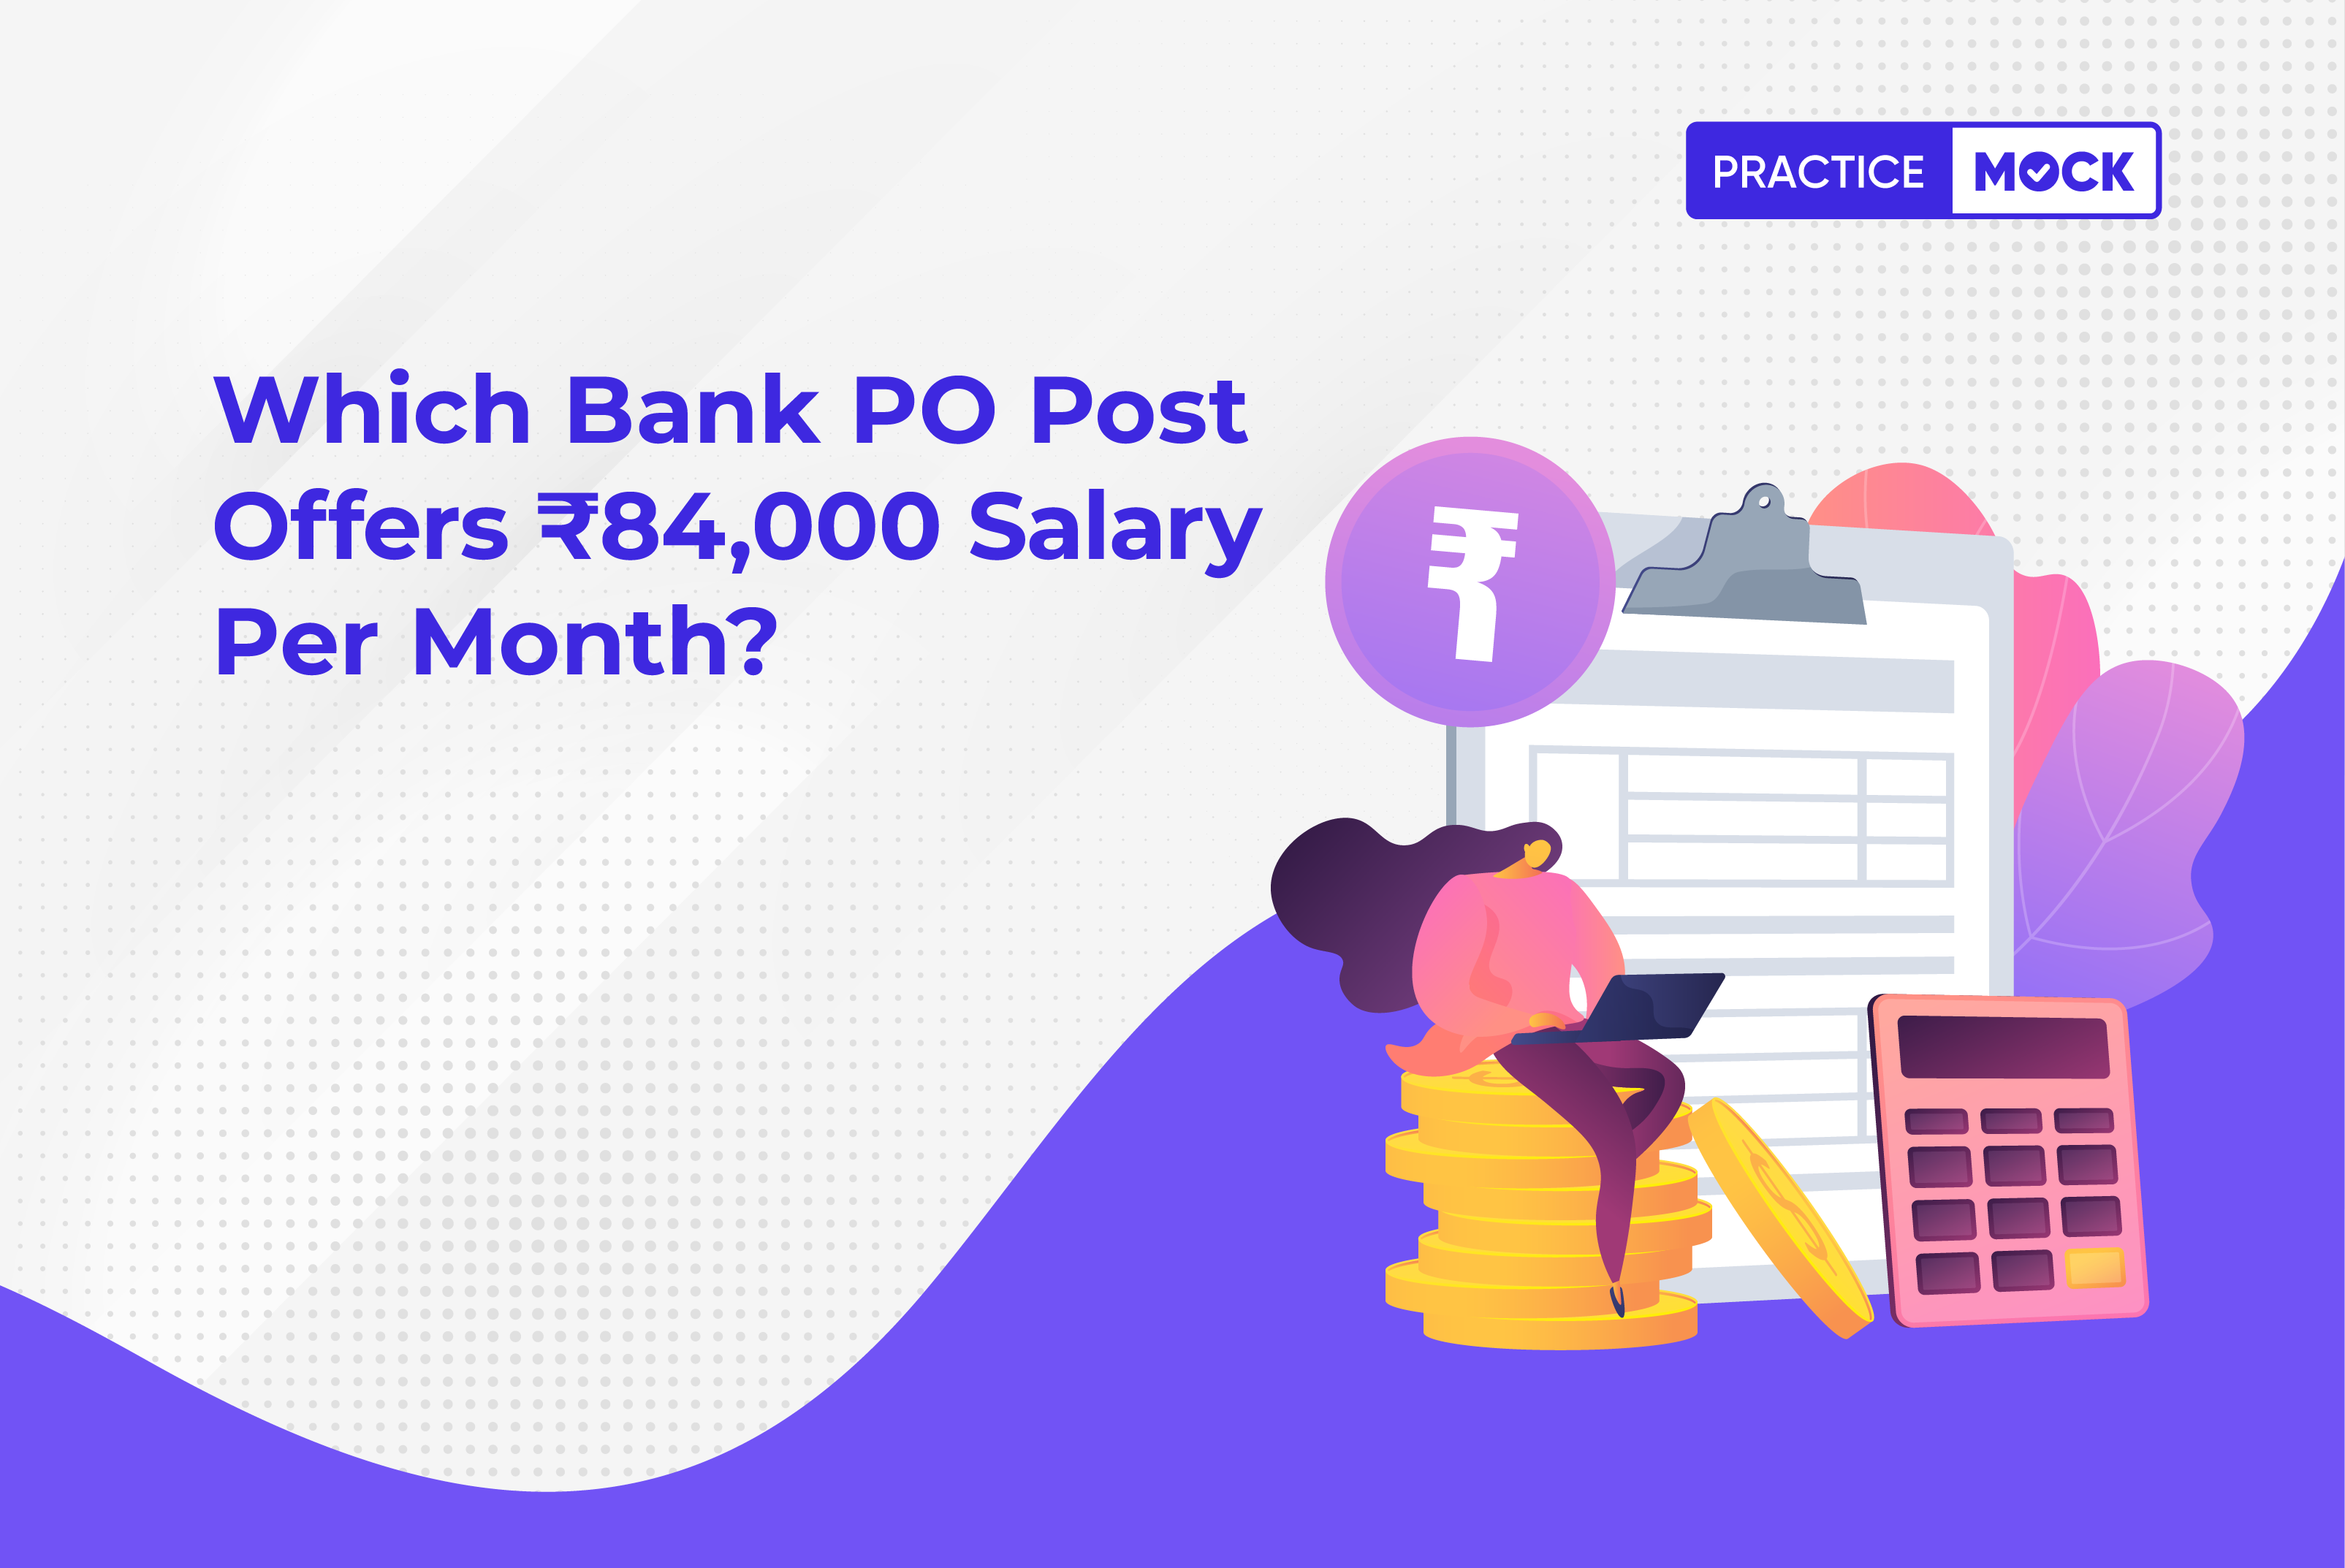 Which Bank PO Post Offers 84, 000 Salary Per Month?